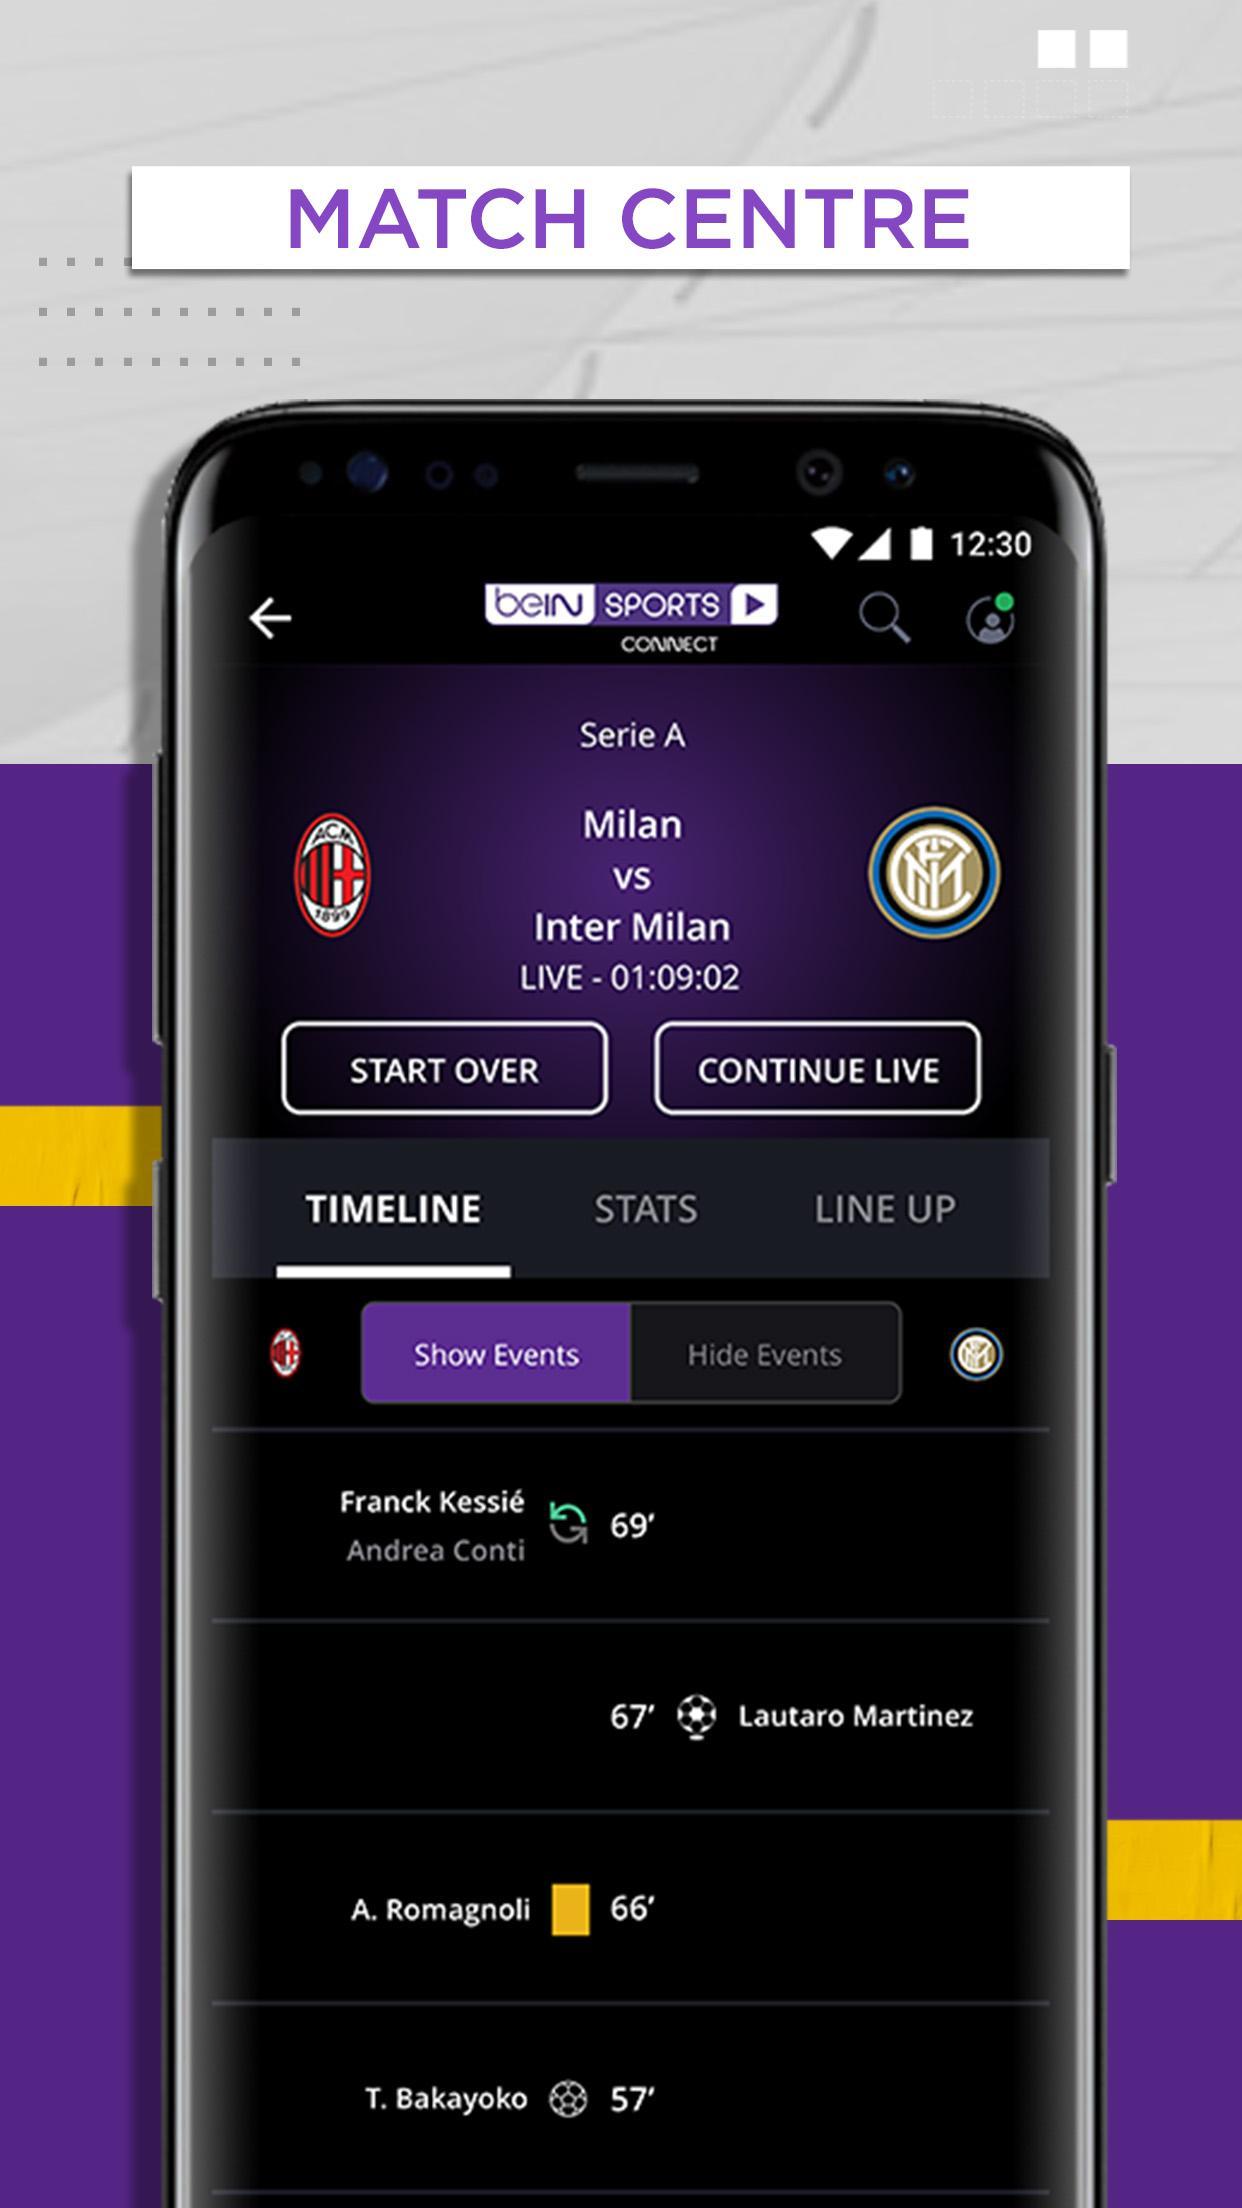 beIN SPORTS CONNECT